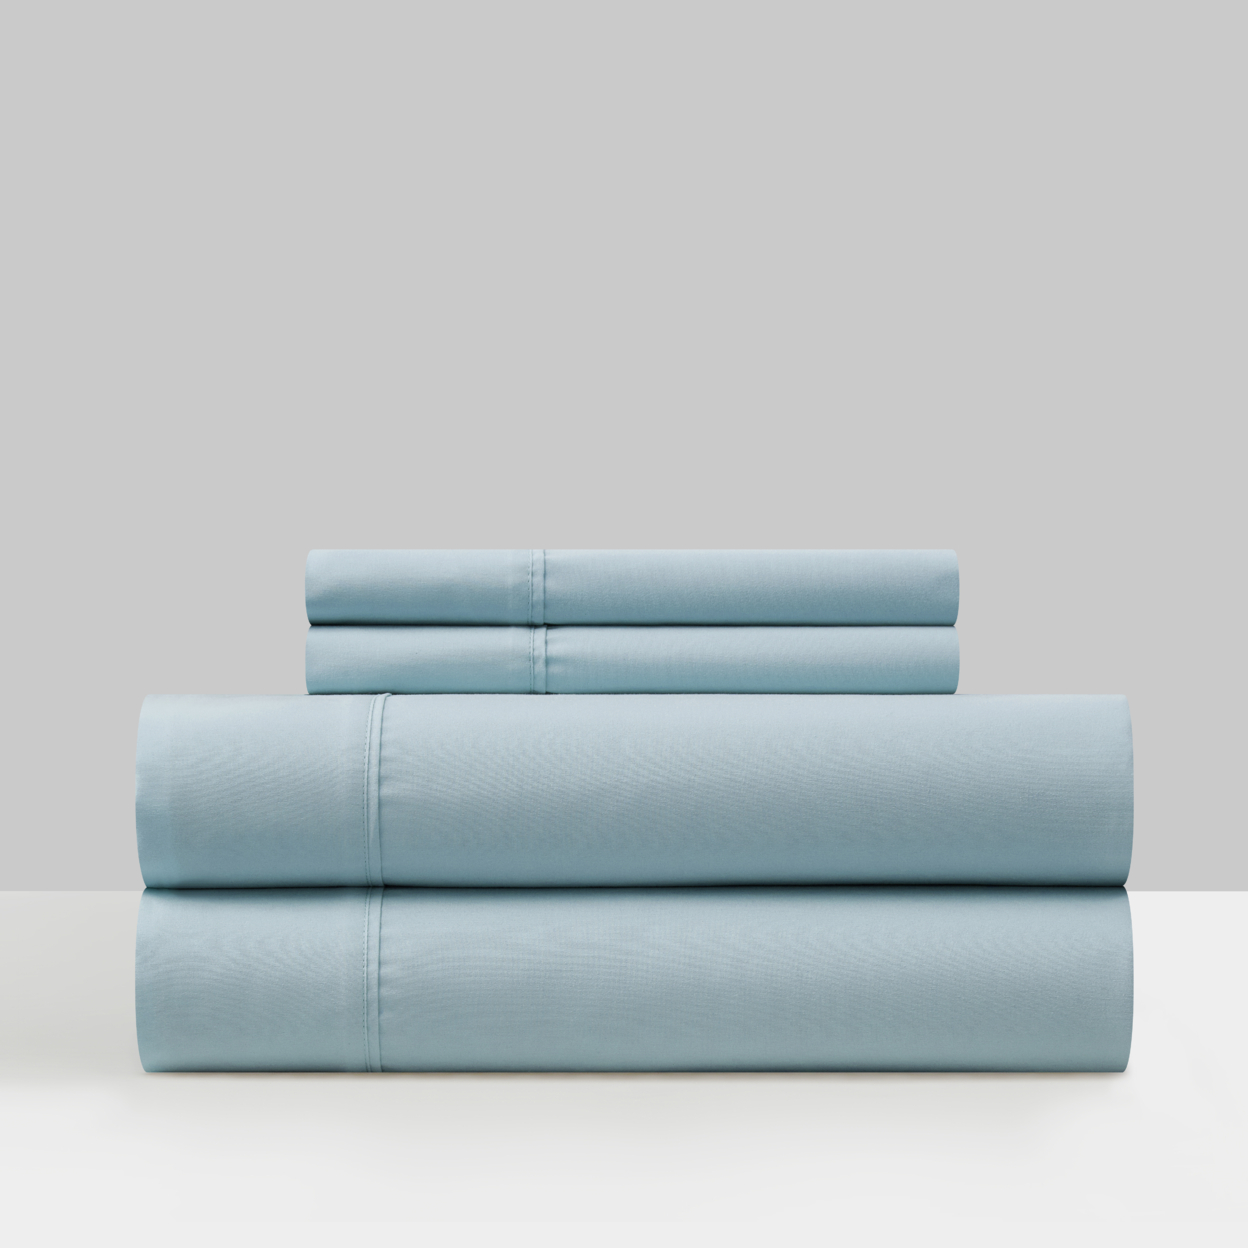 Shton 3 Or 4 Piece Sheet Set Super Soft Solid Color With Piping Flange Edge - Blue, Twin